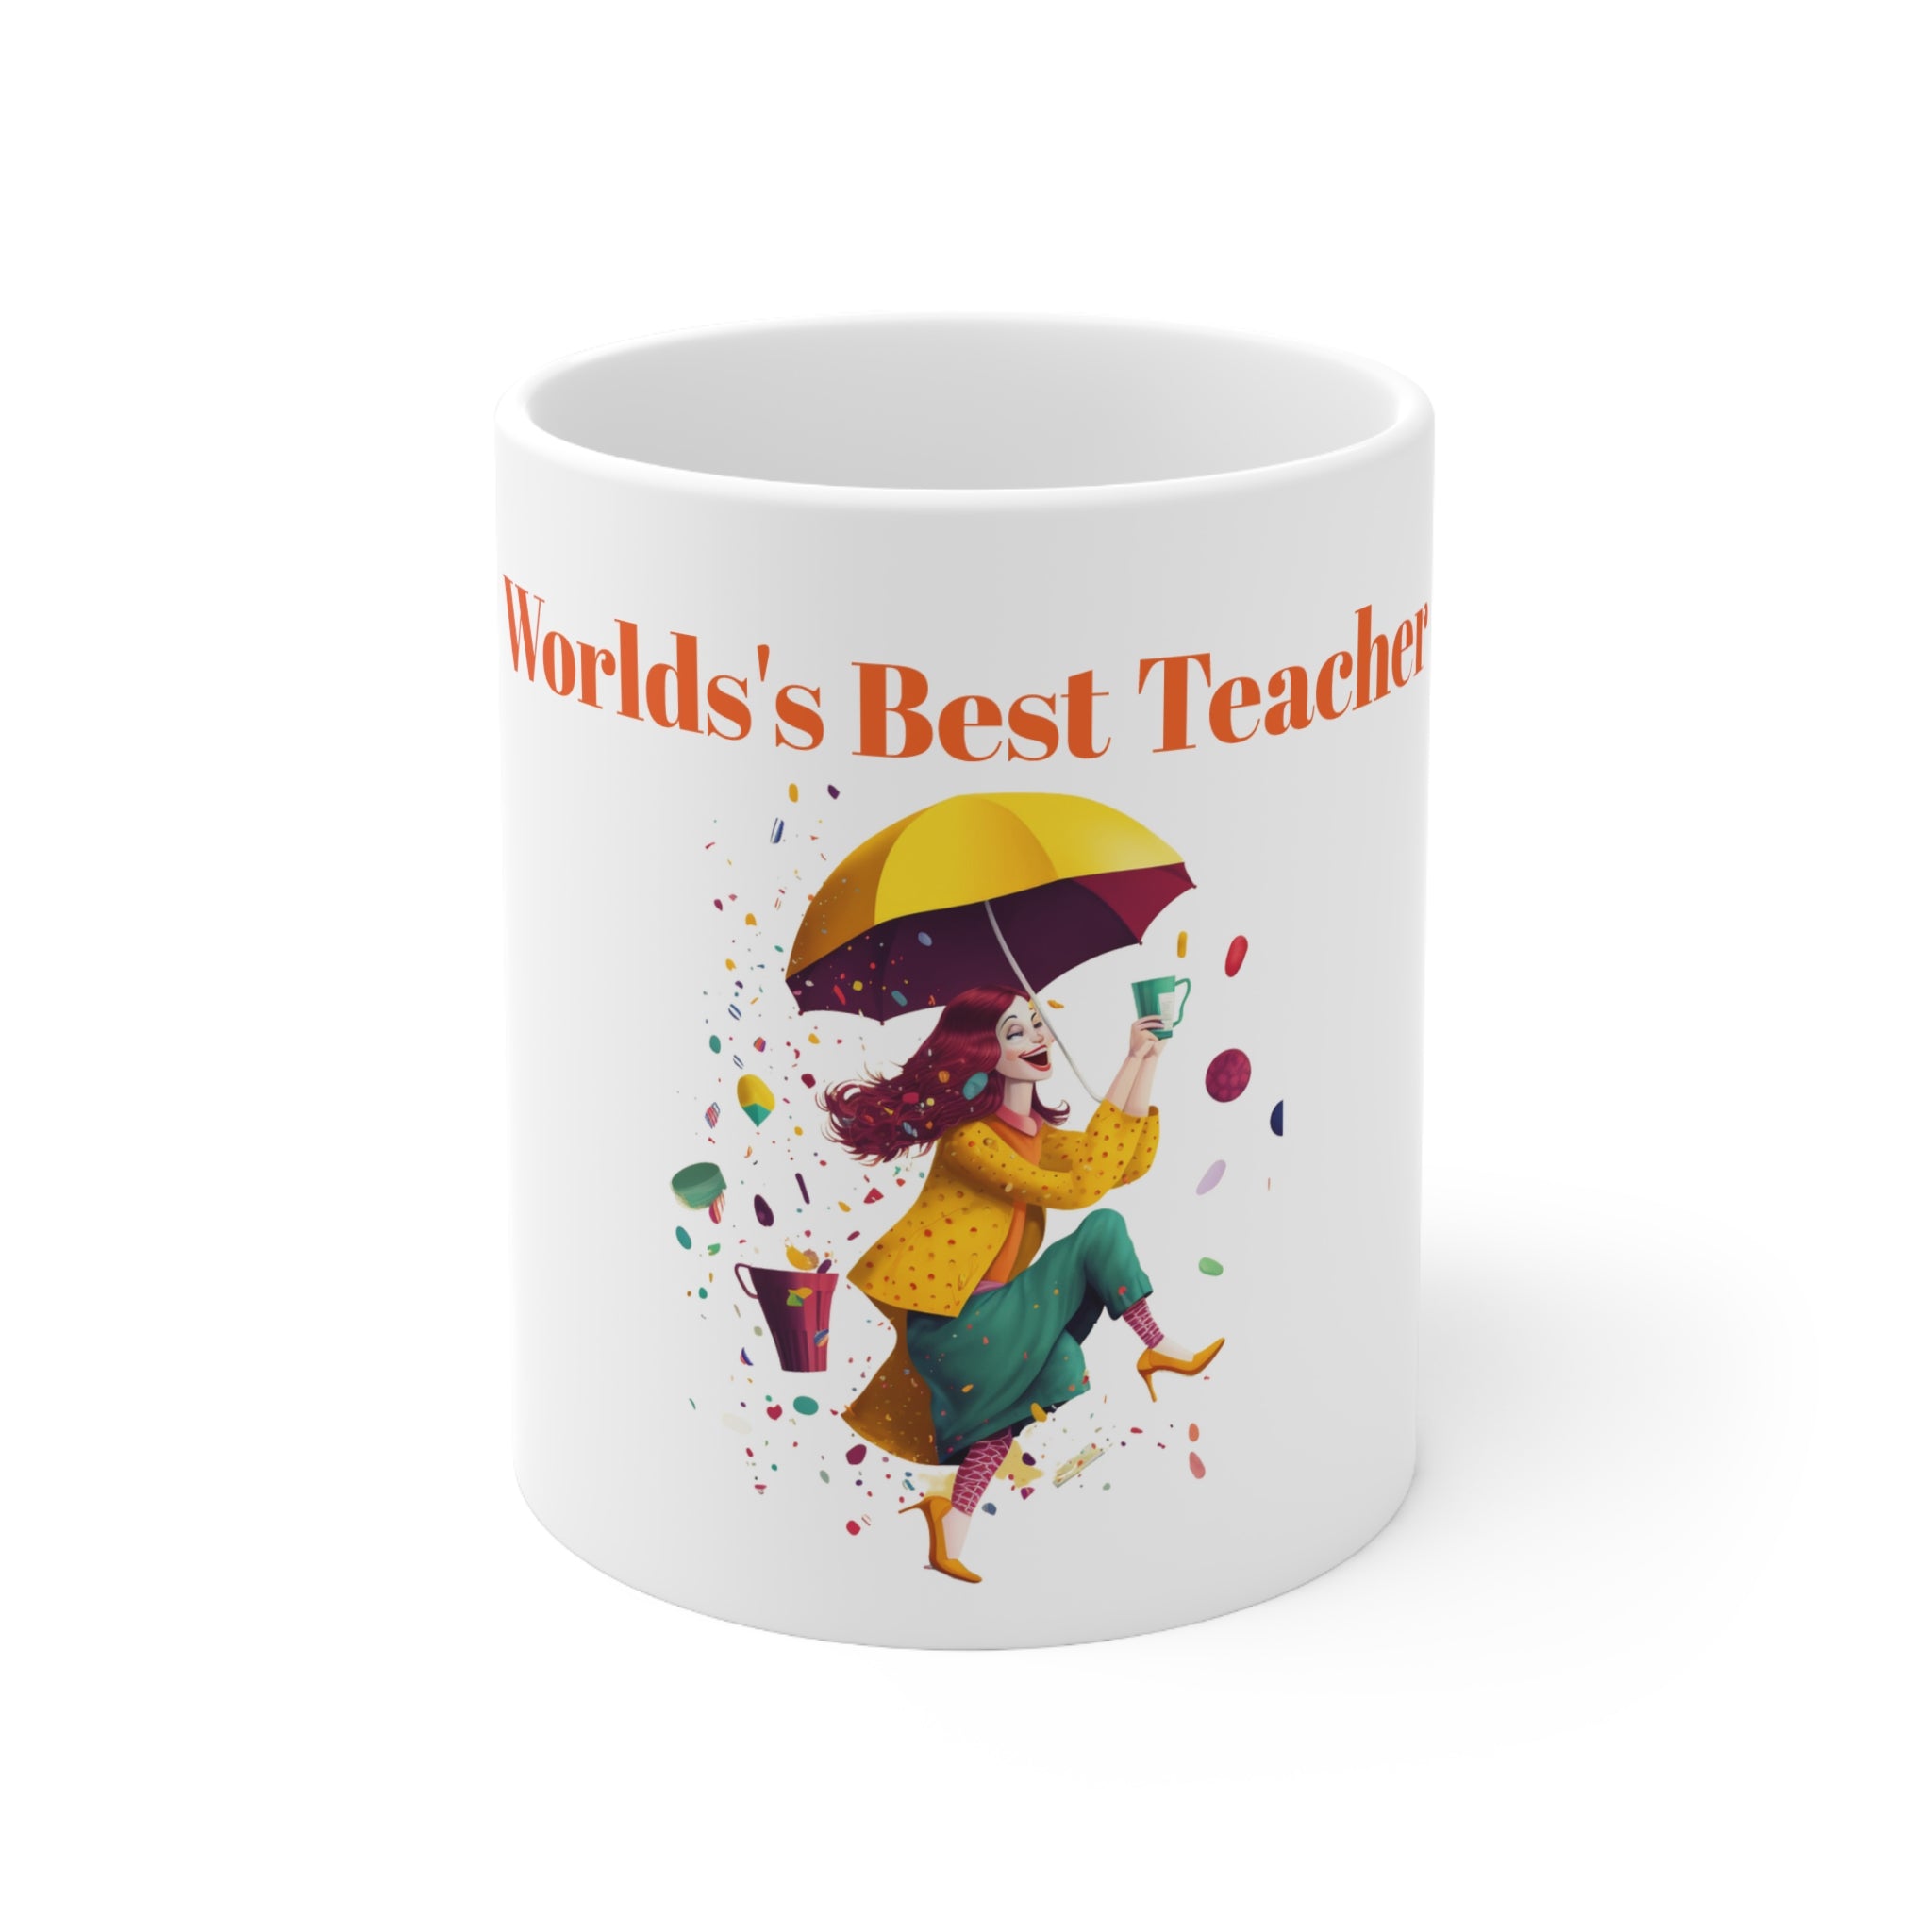 Cute Coffee Mug/ Cup With Happy Teacher With Her Cute Yellow Umbrella Celebrating a Cup of Hot Starbucks Coffee to Start the Day on a Rainy Morning. Text Says World's Best Teacher